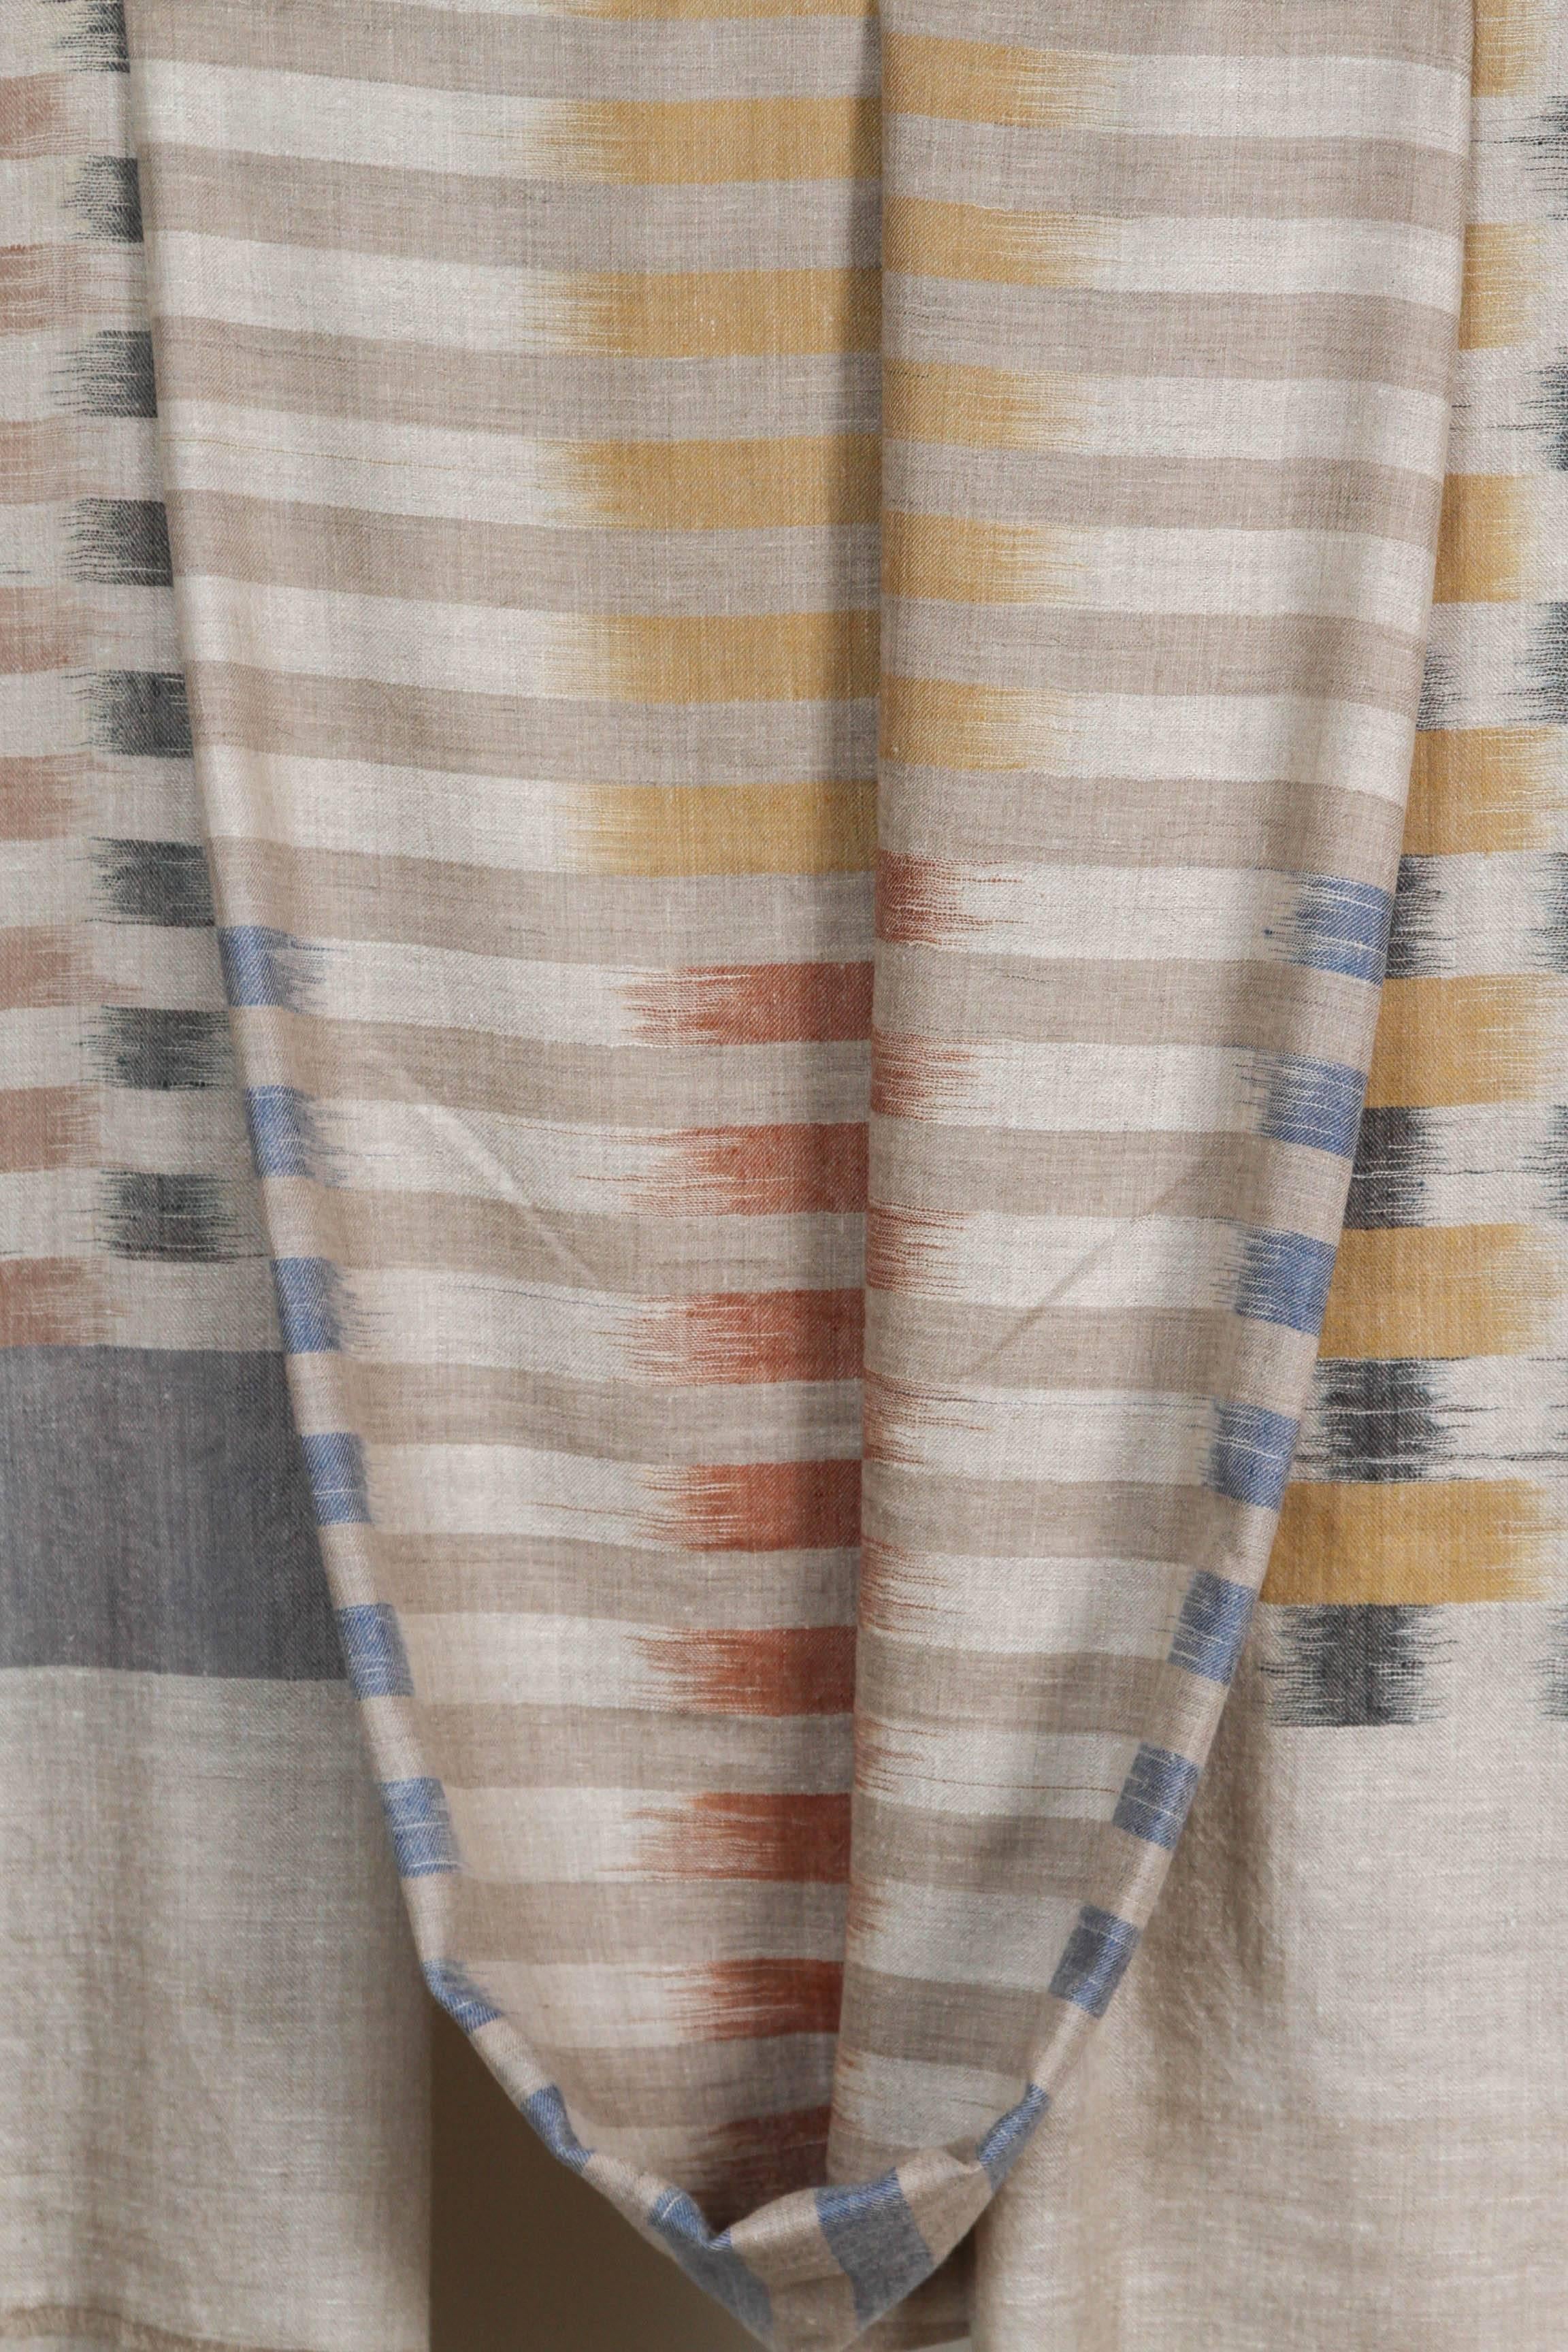 Oversize Cashmere Woven Ikat Throws or Shawls In Excellent Condition For Sale In Los Angeles, CA